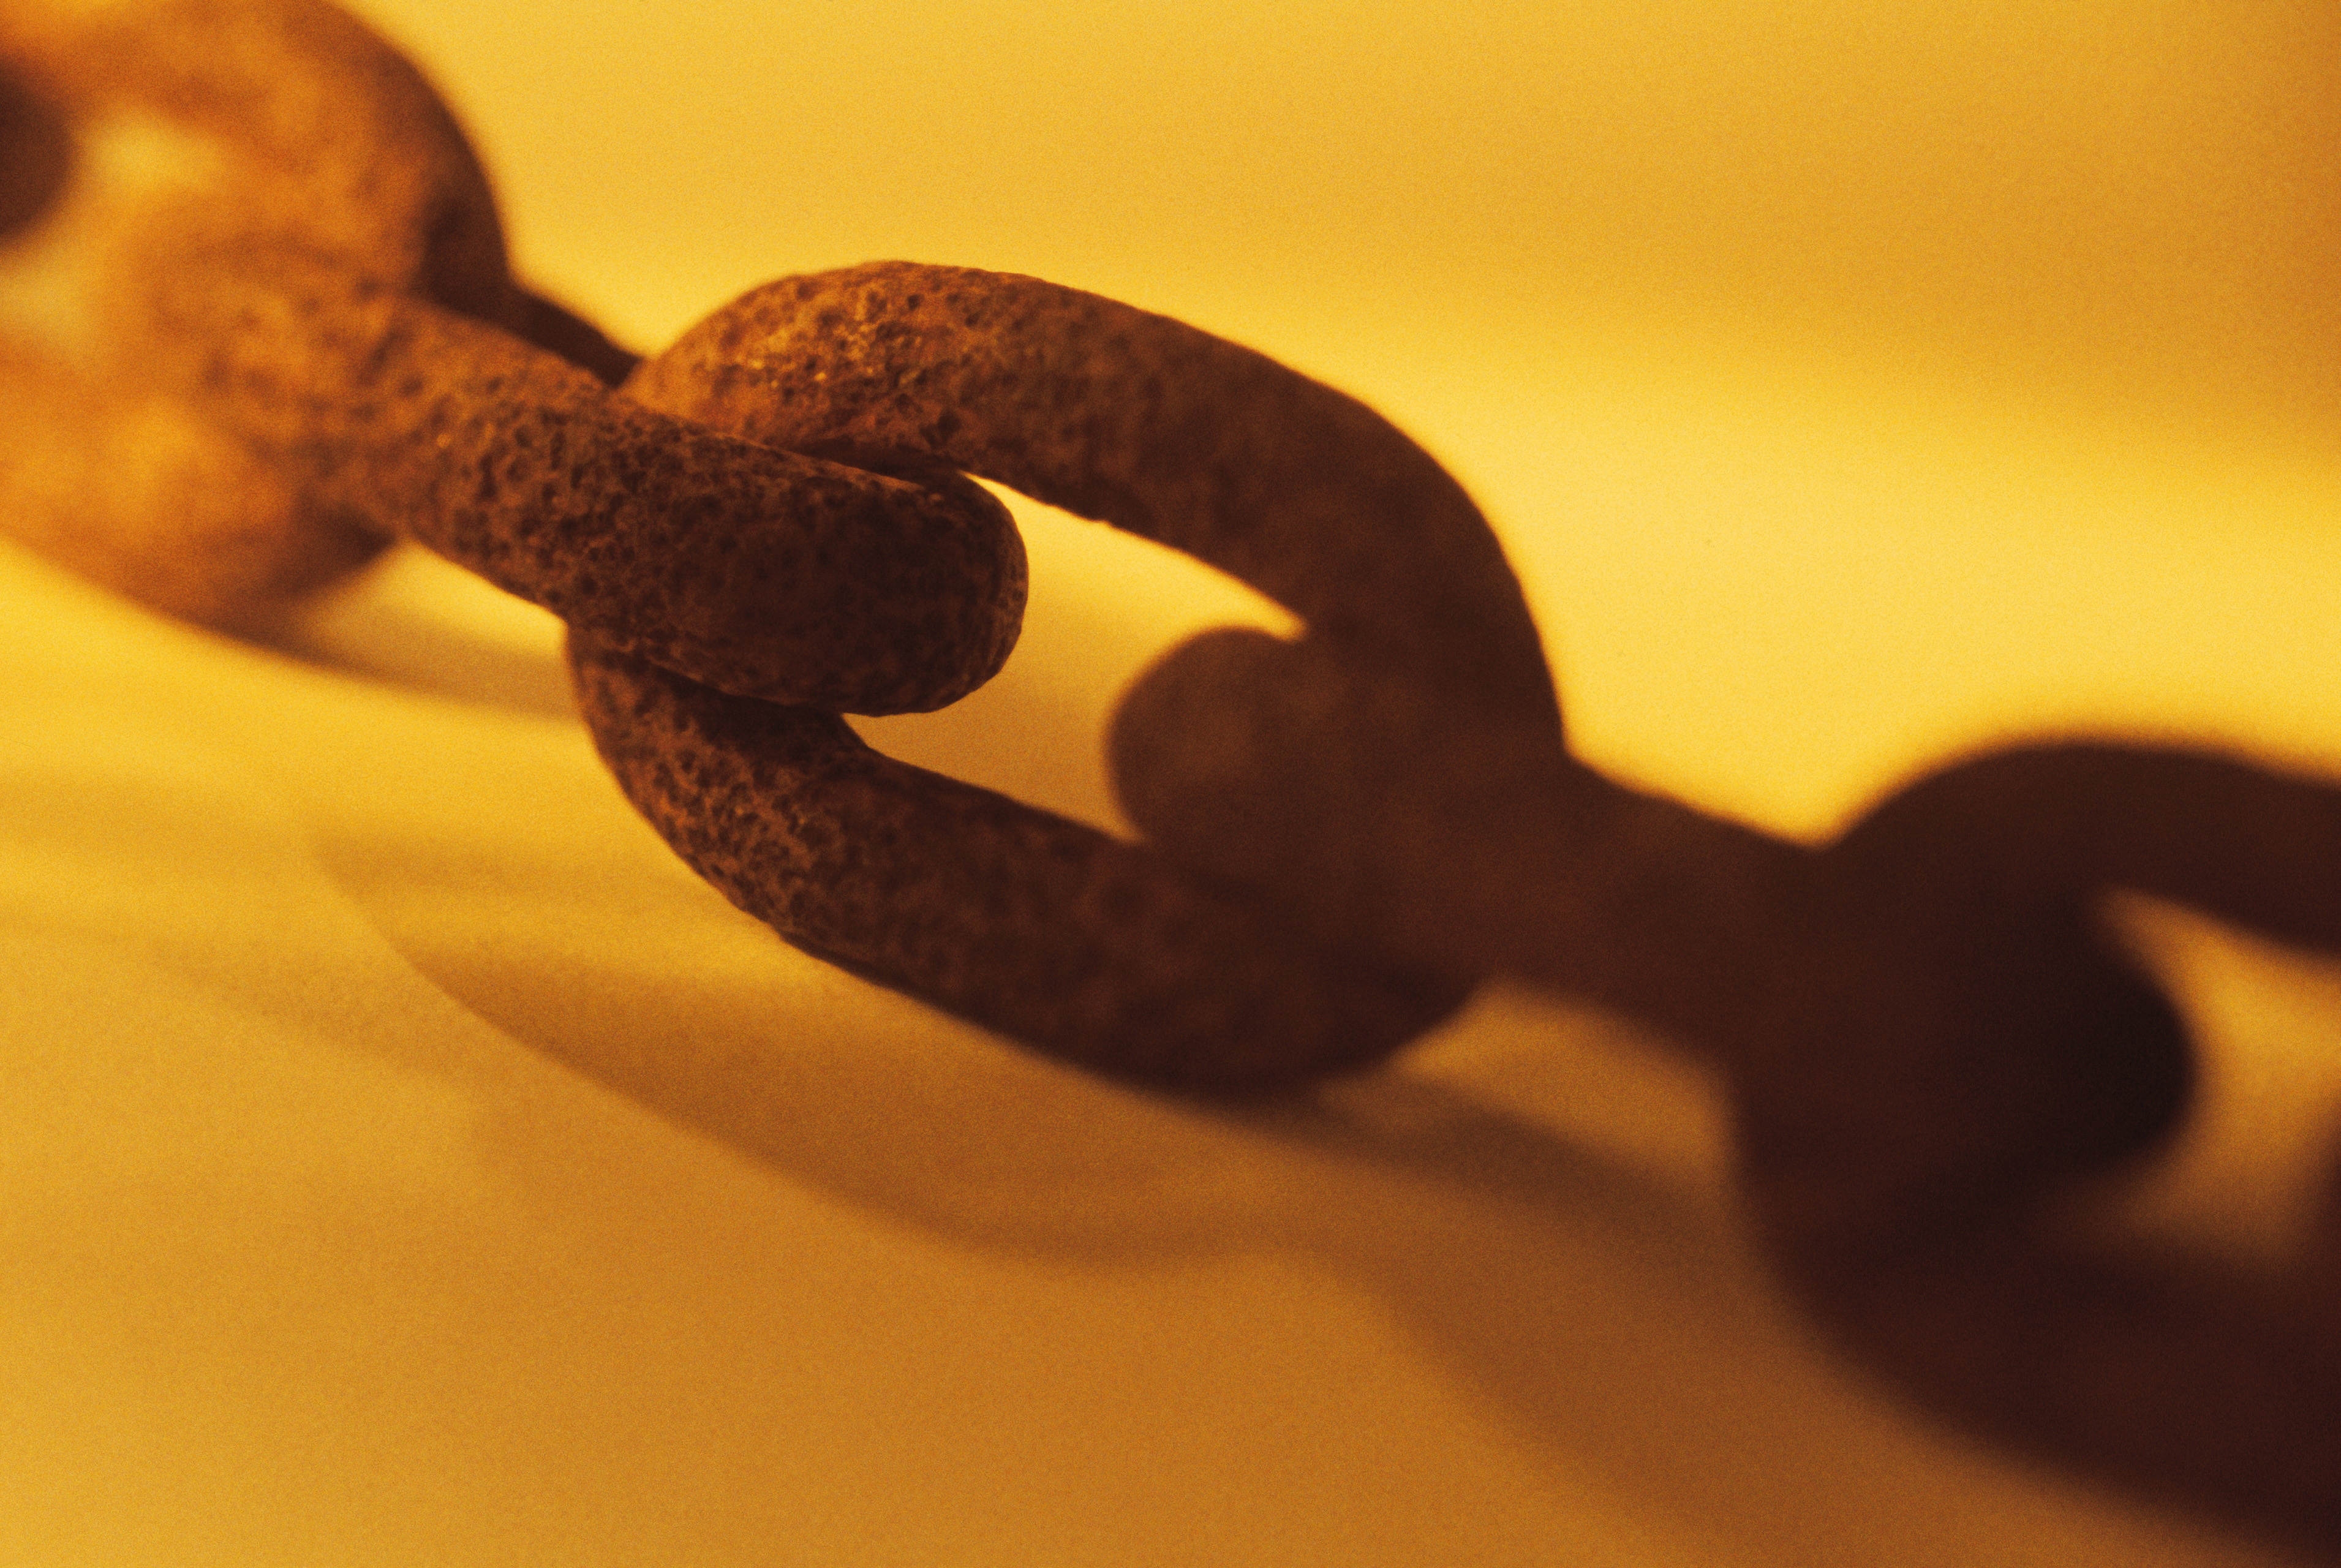 chains, miscellanea, miscellaneous, metal, rust, yellow background, corrosion